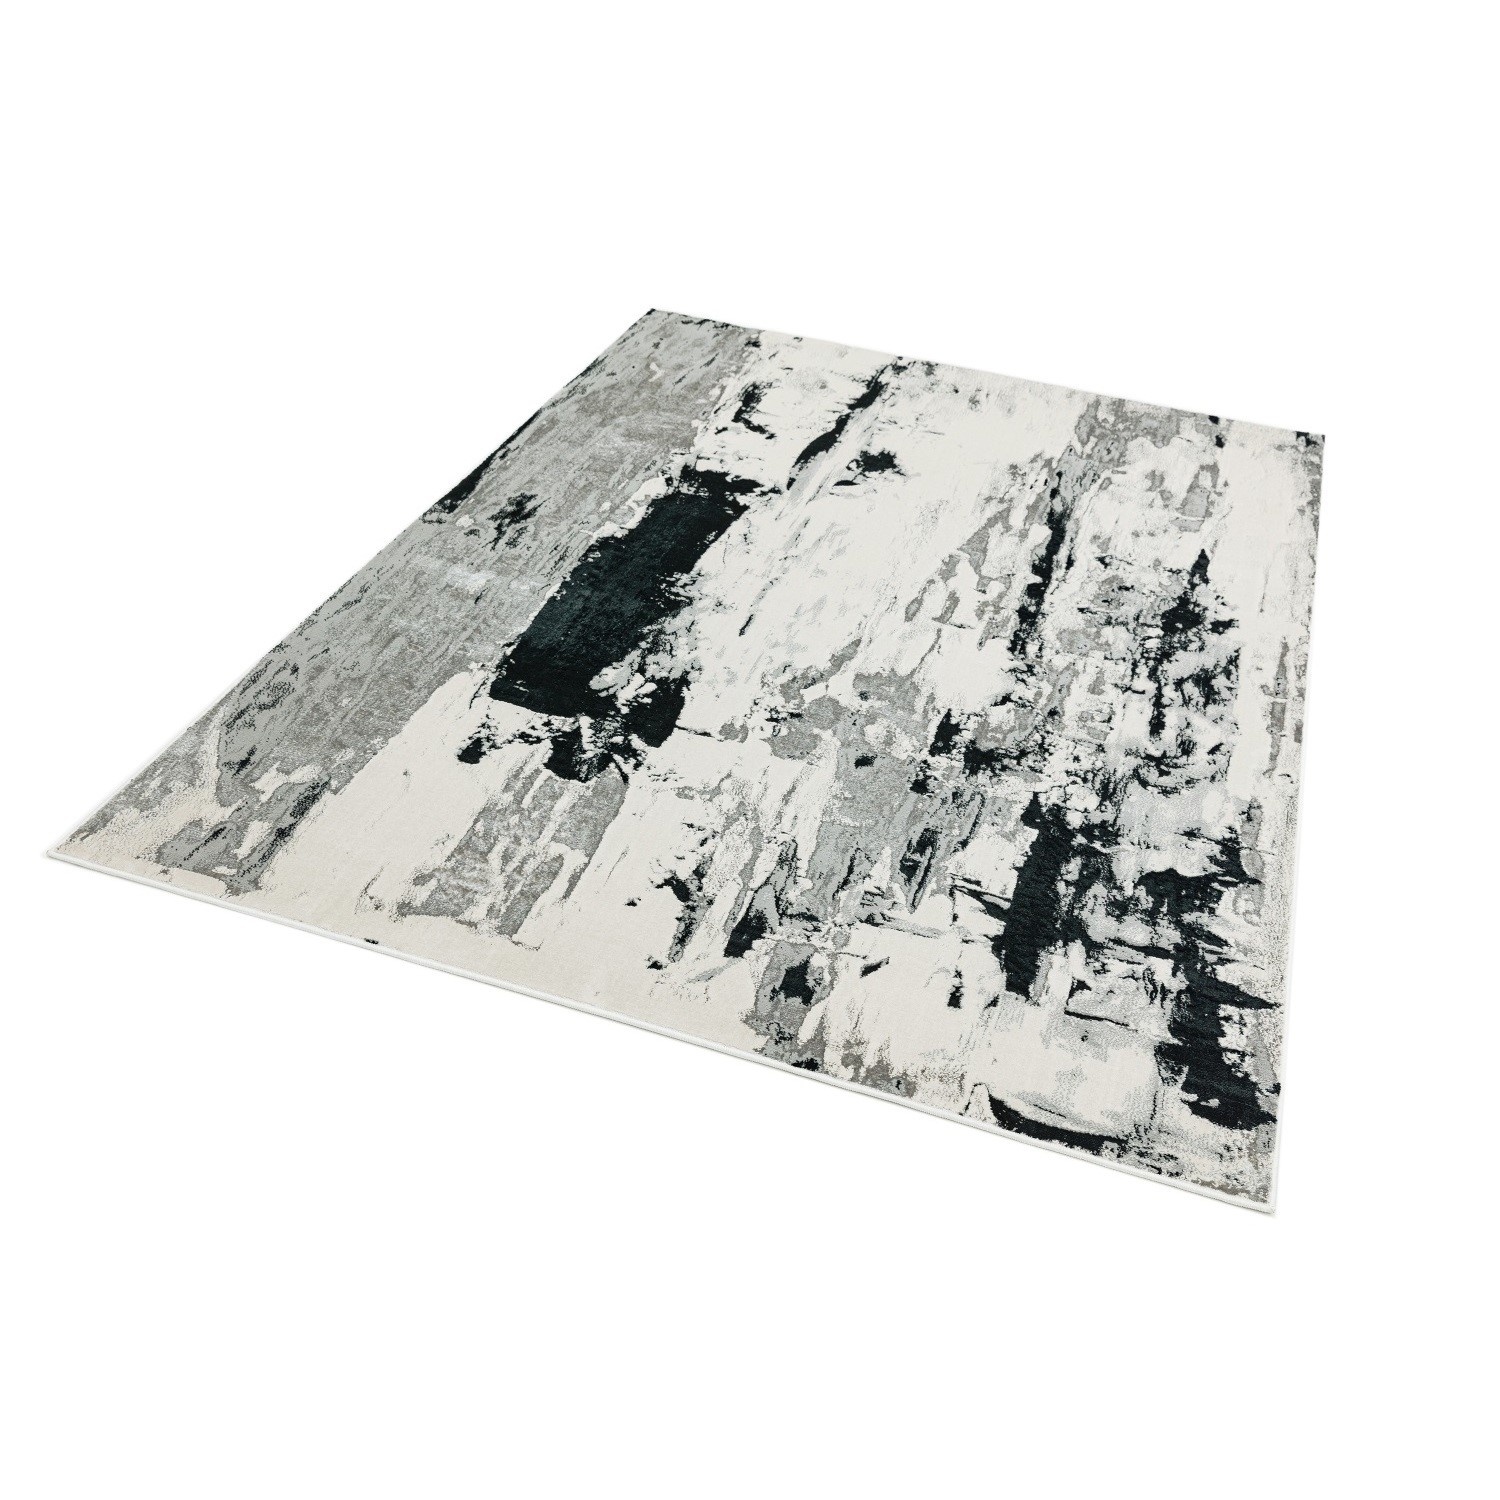 Read more about Large black and grey rug 200x290cm aurora